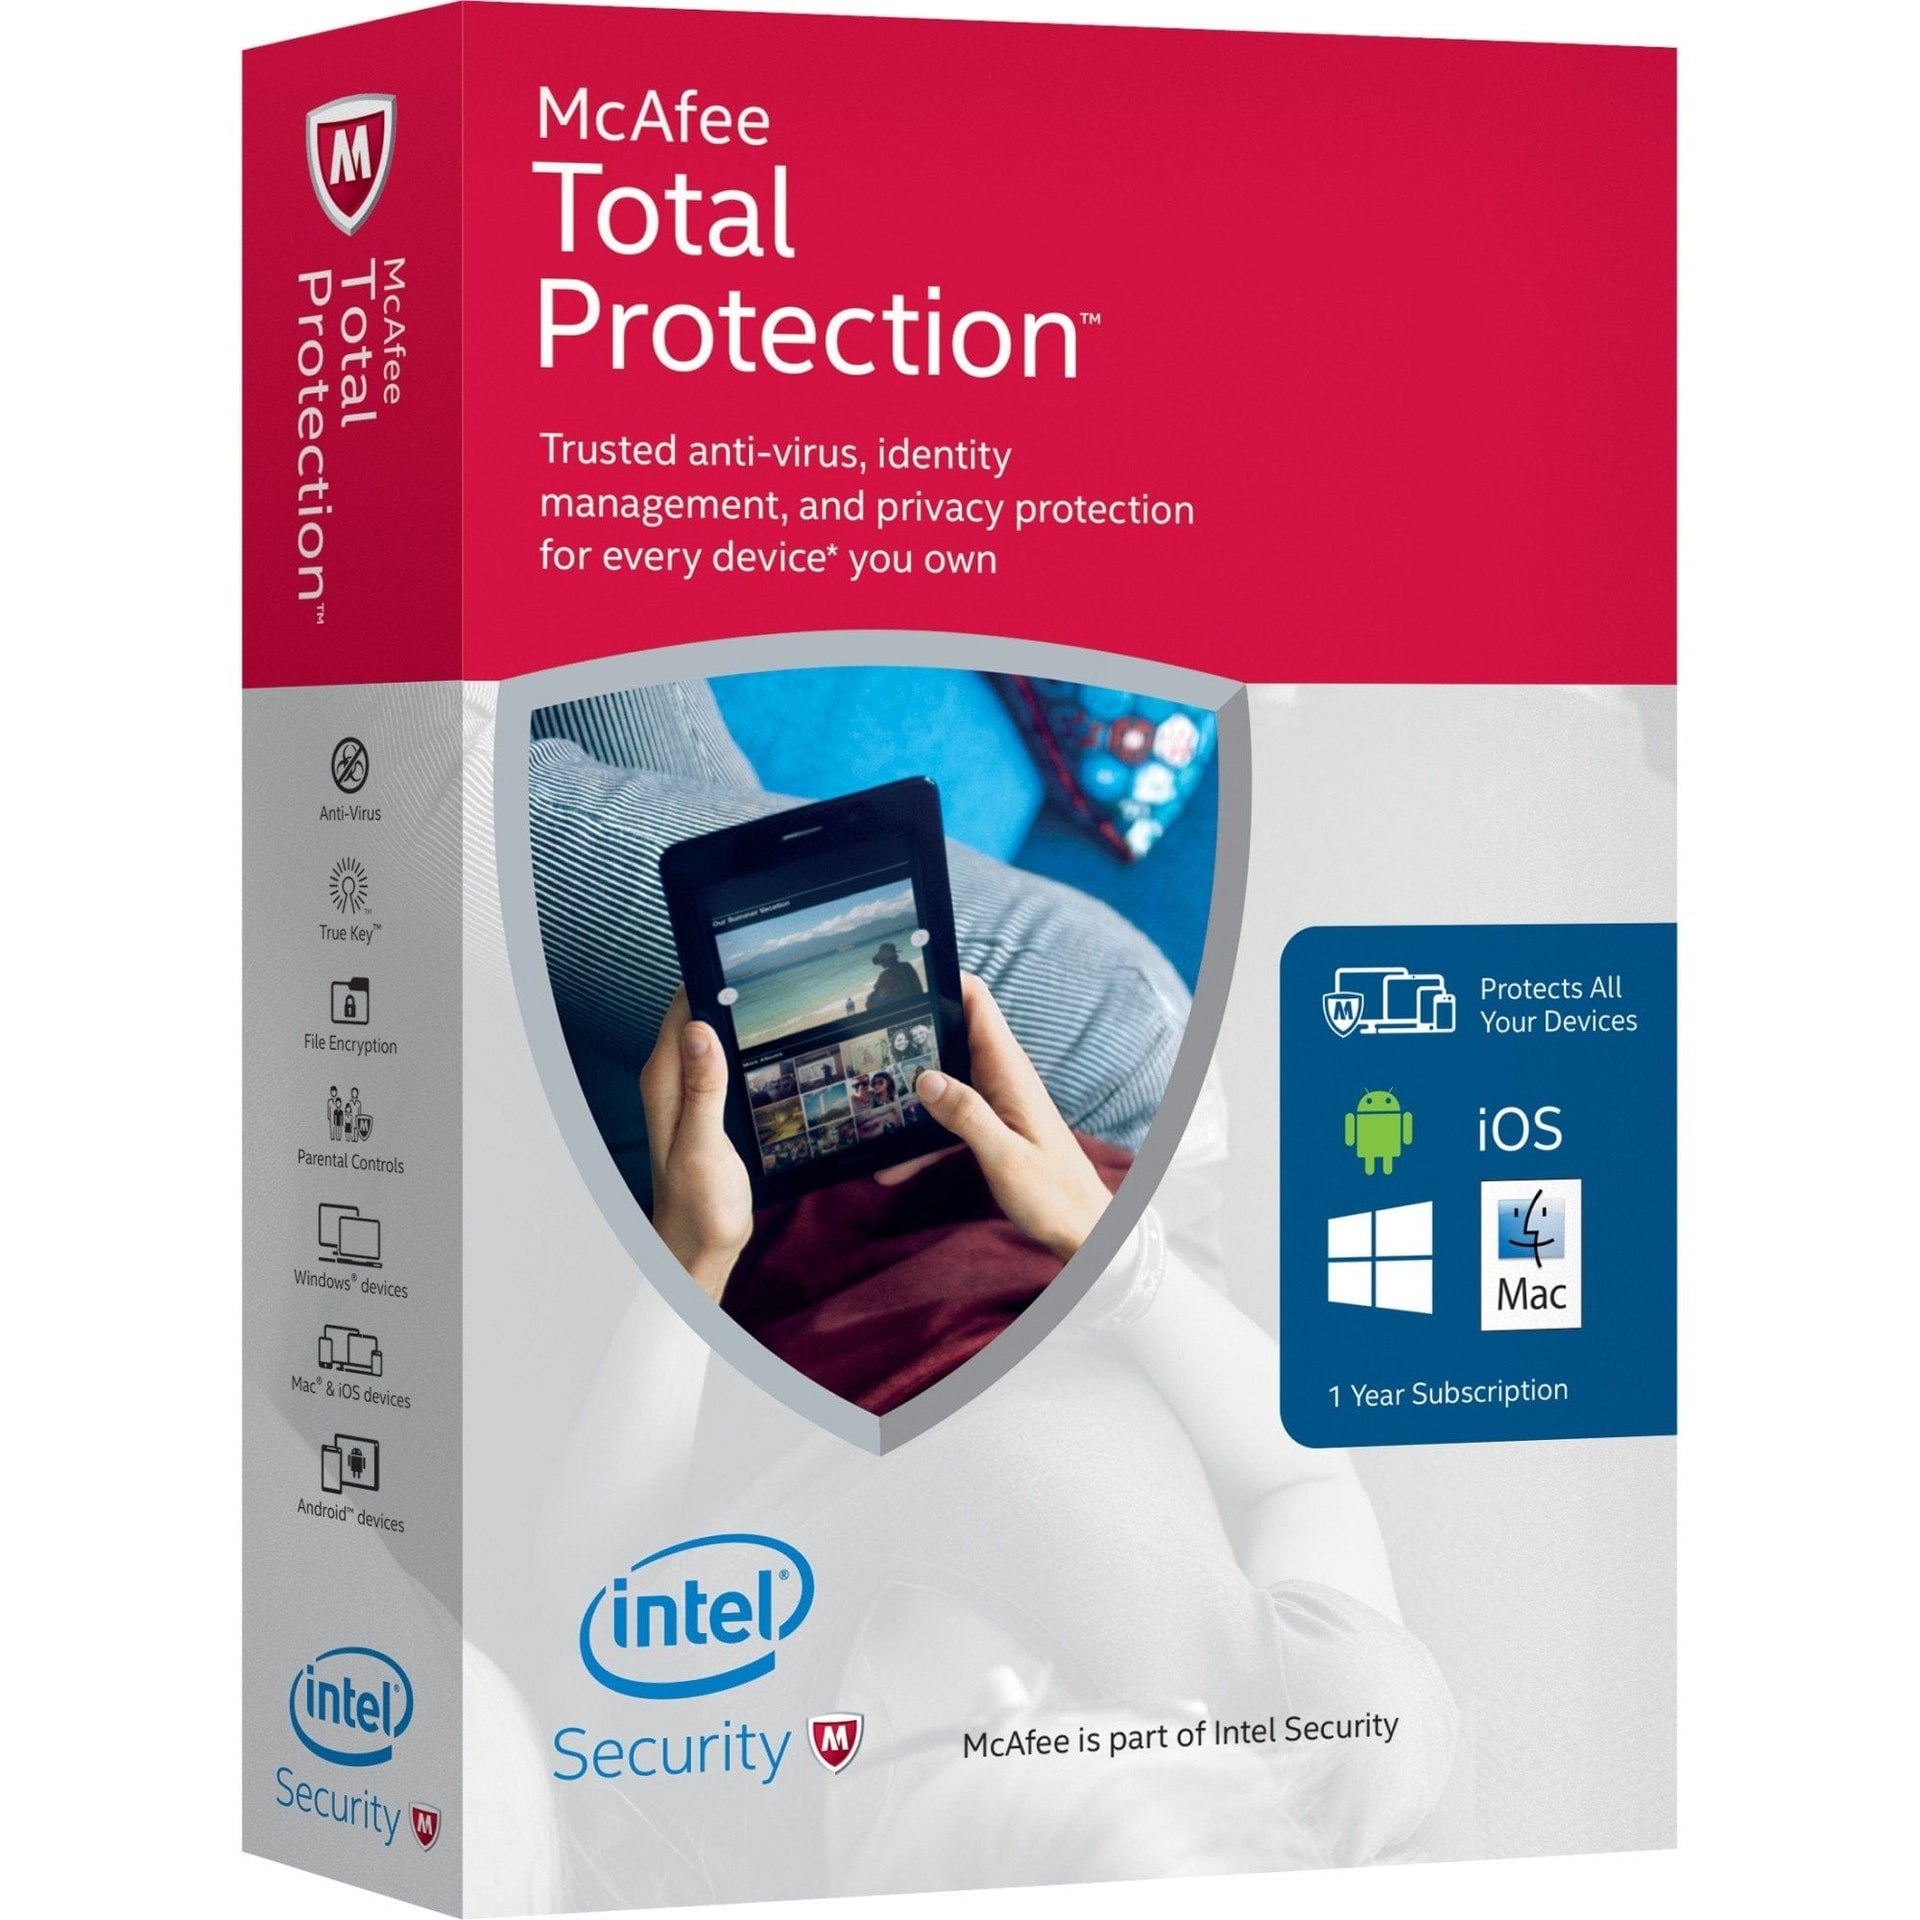 McAfee Total Protection Antivirus & Internet Security Software for